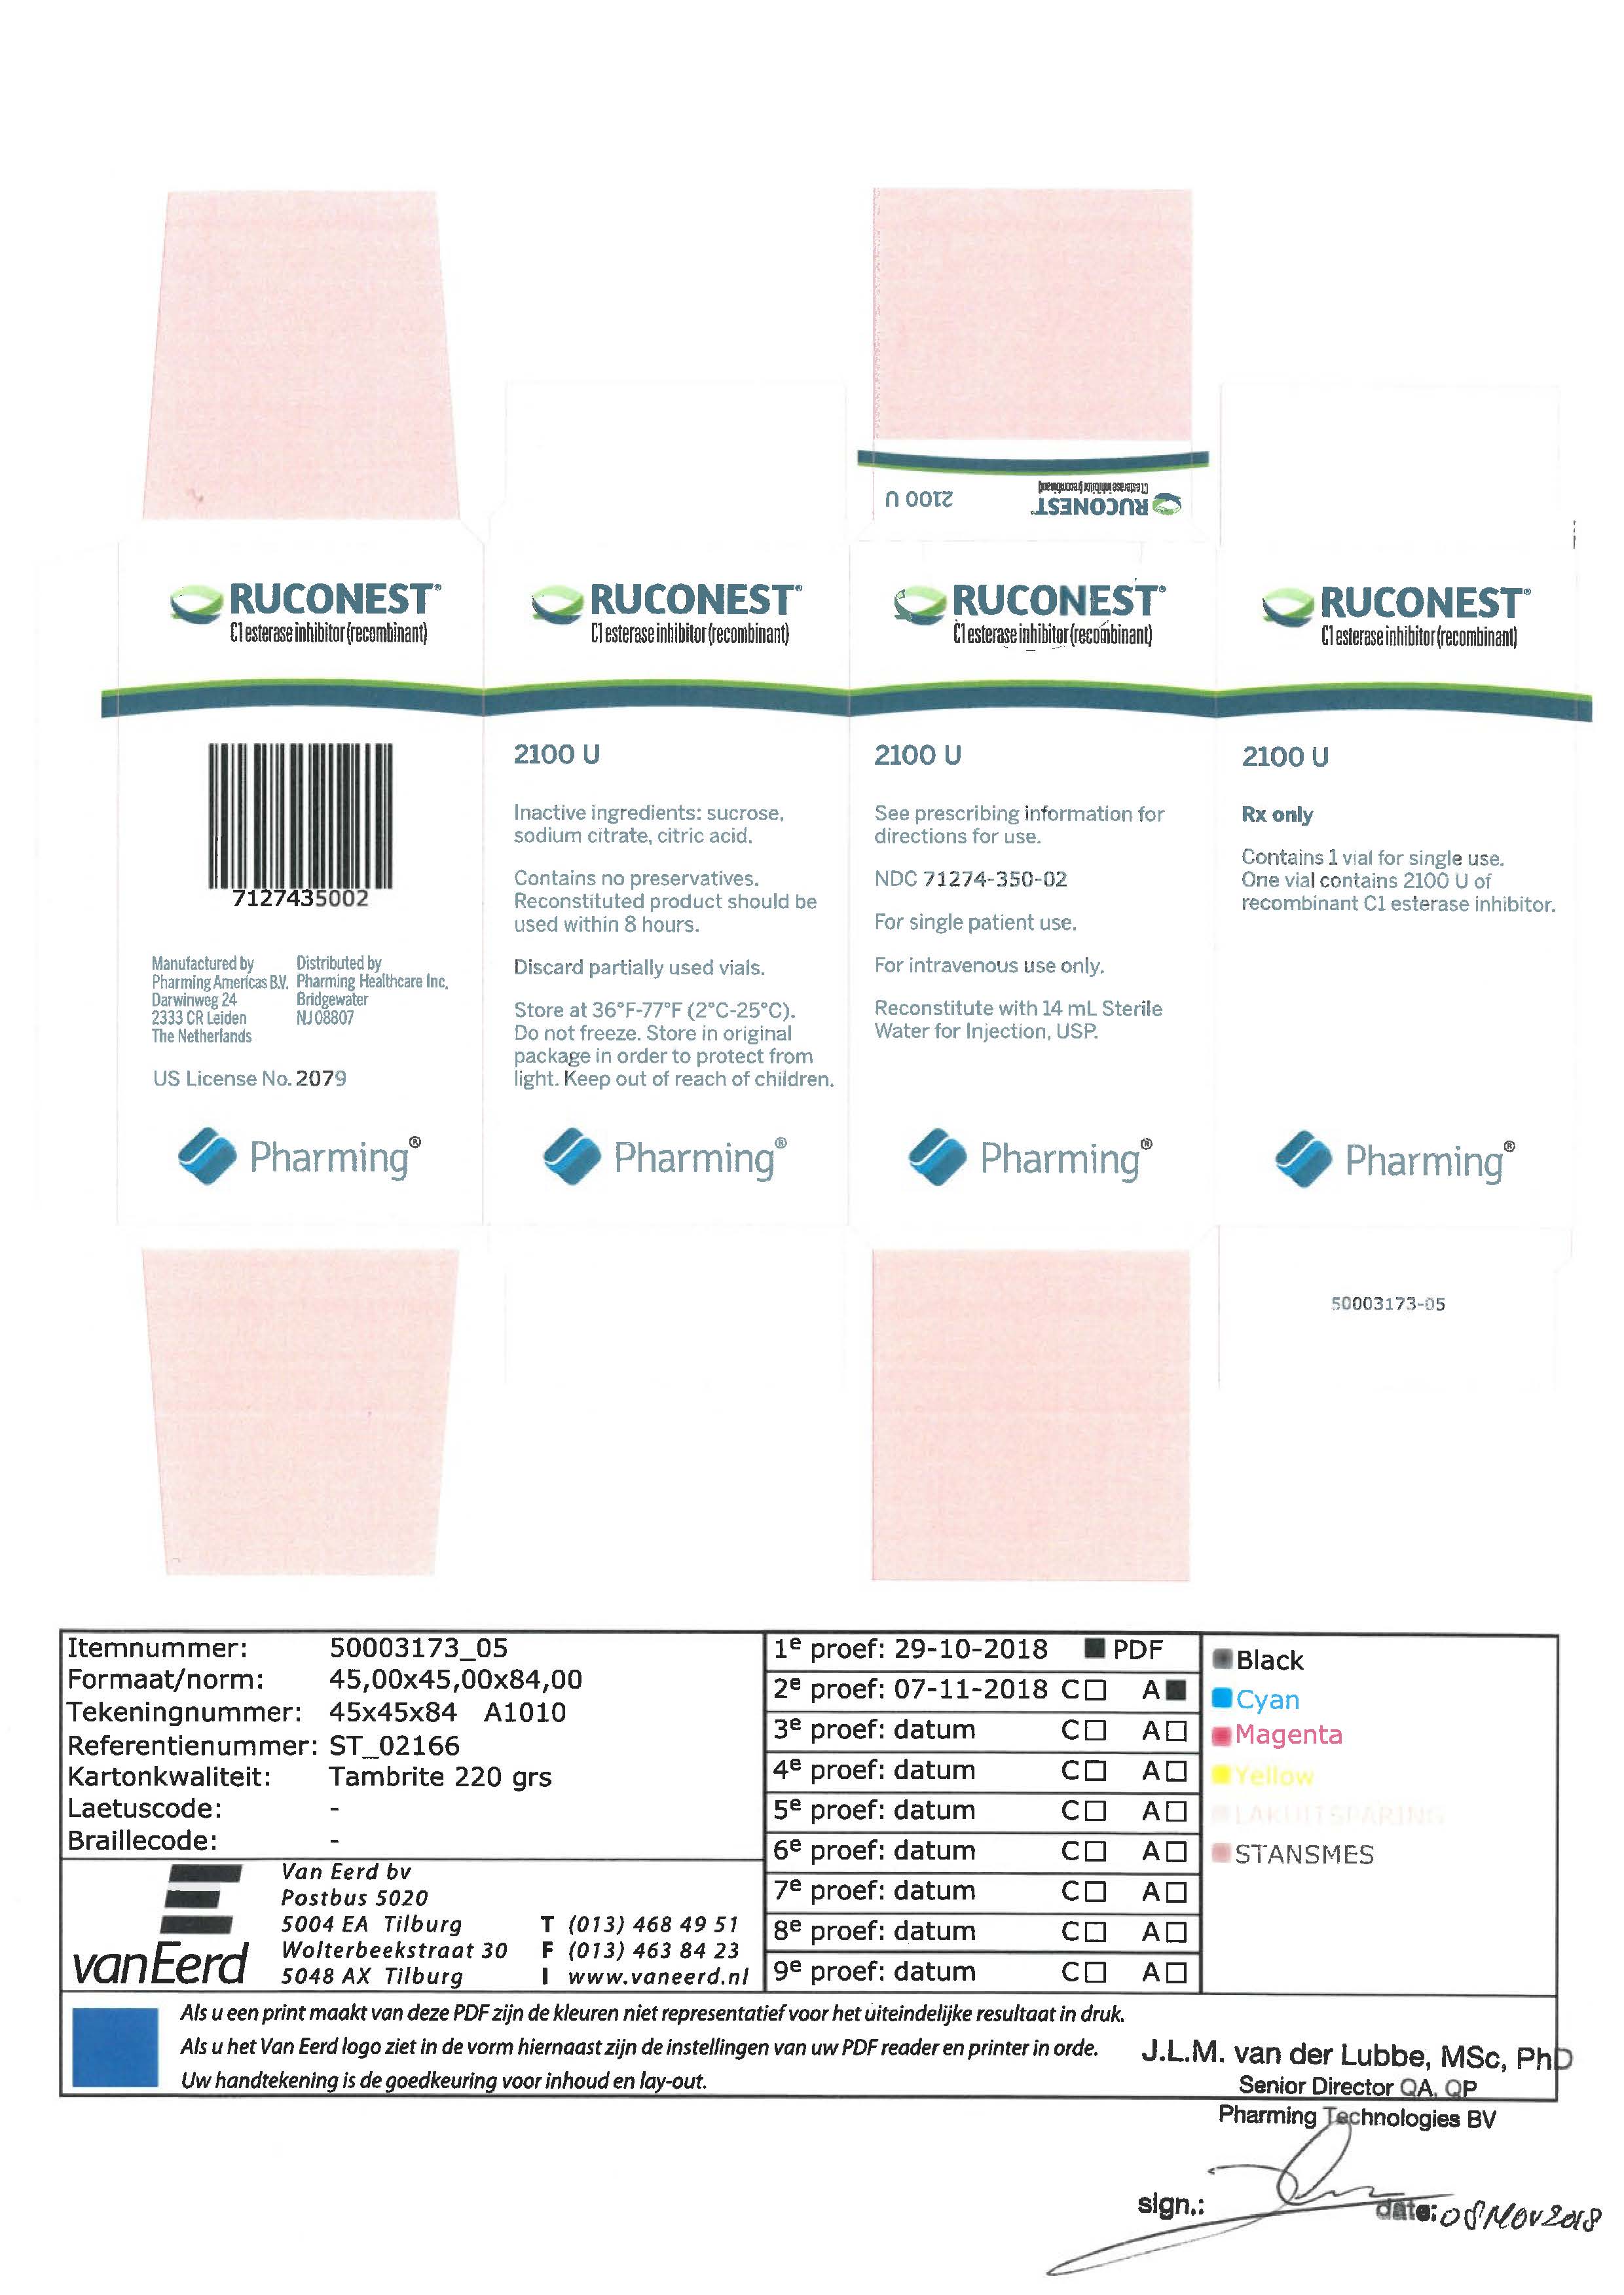 Updated Package Label